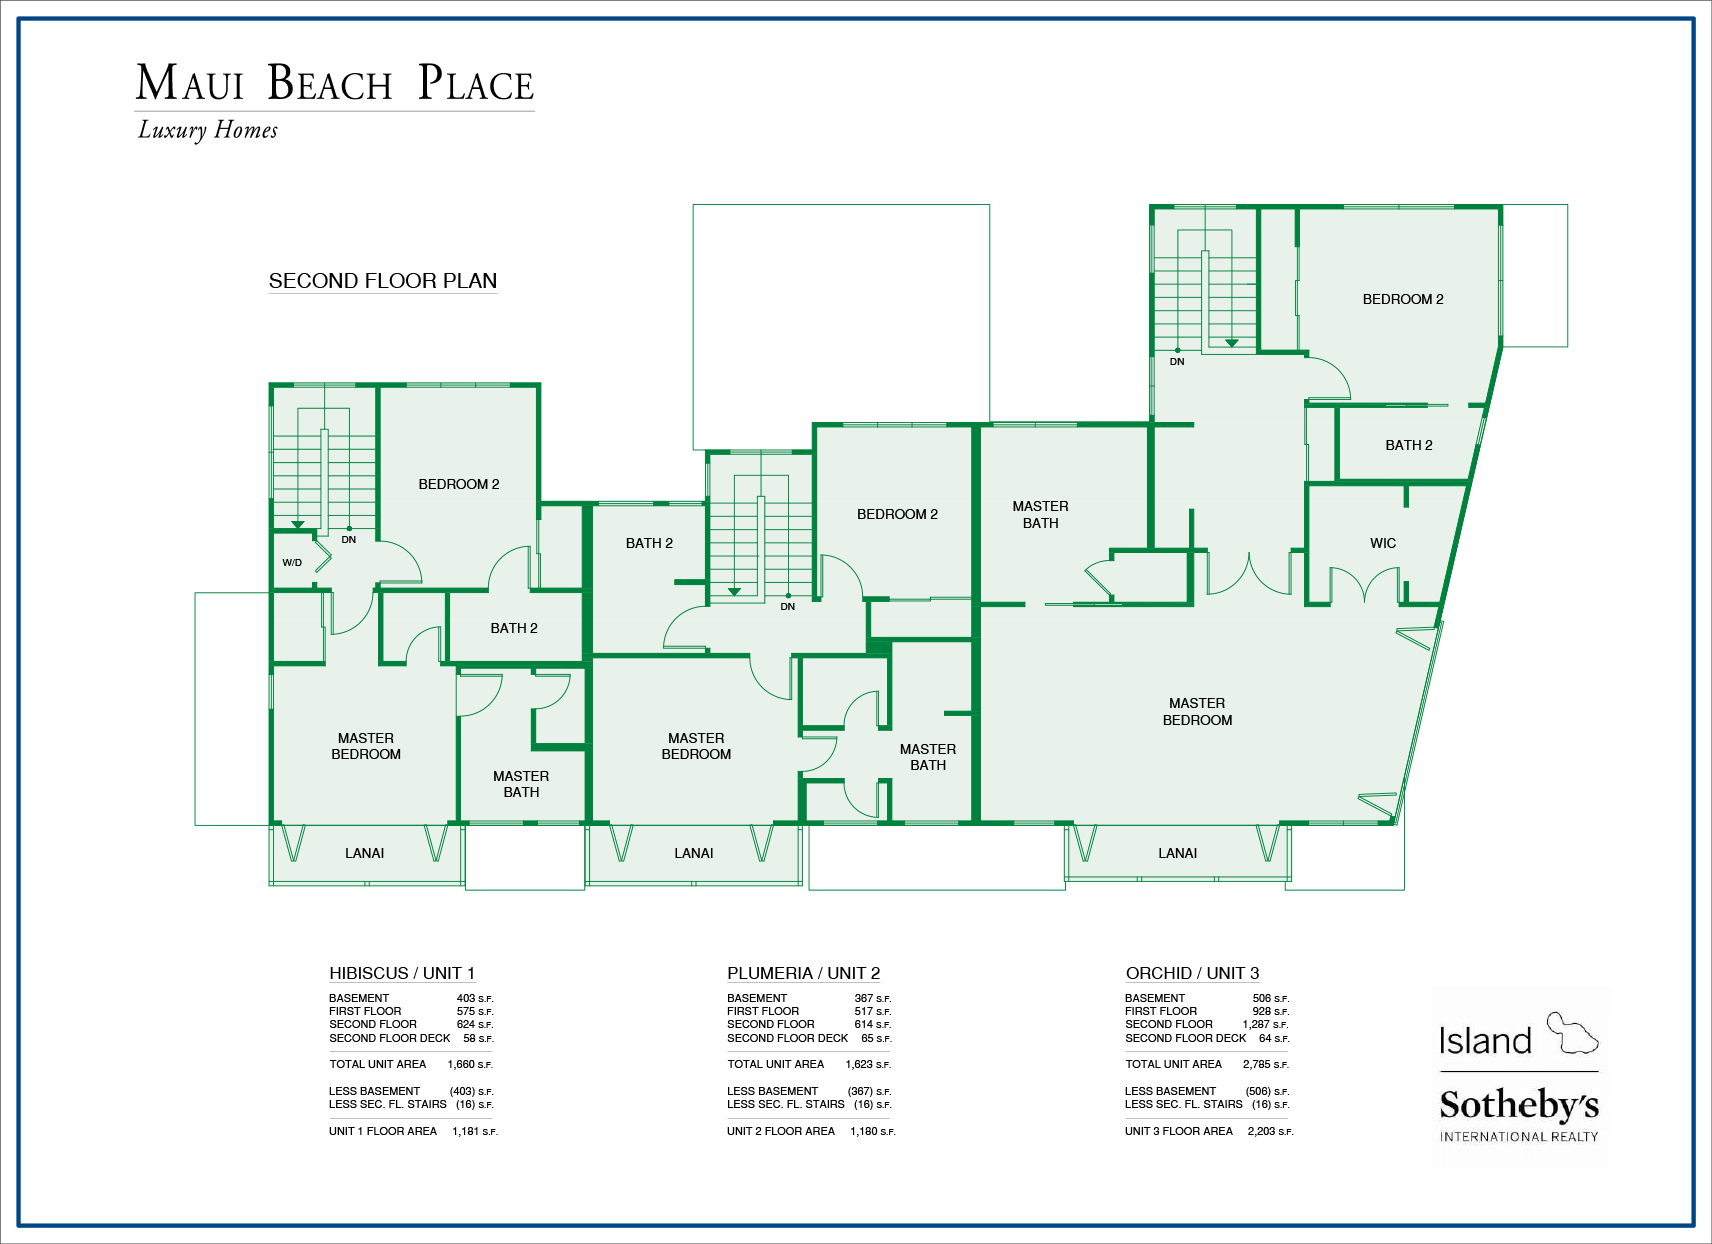 Map of Maui Beach Place 2nd Floor